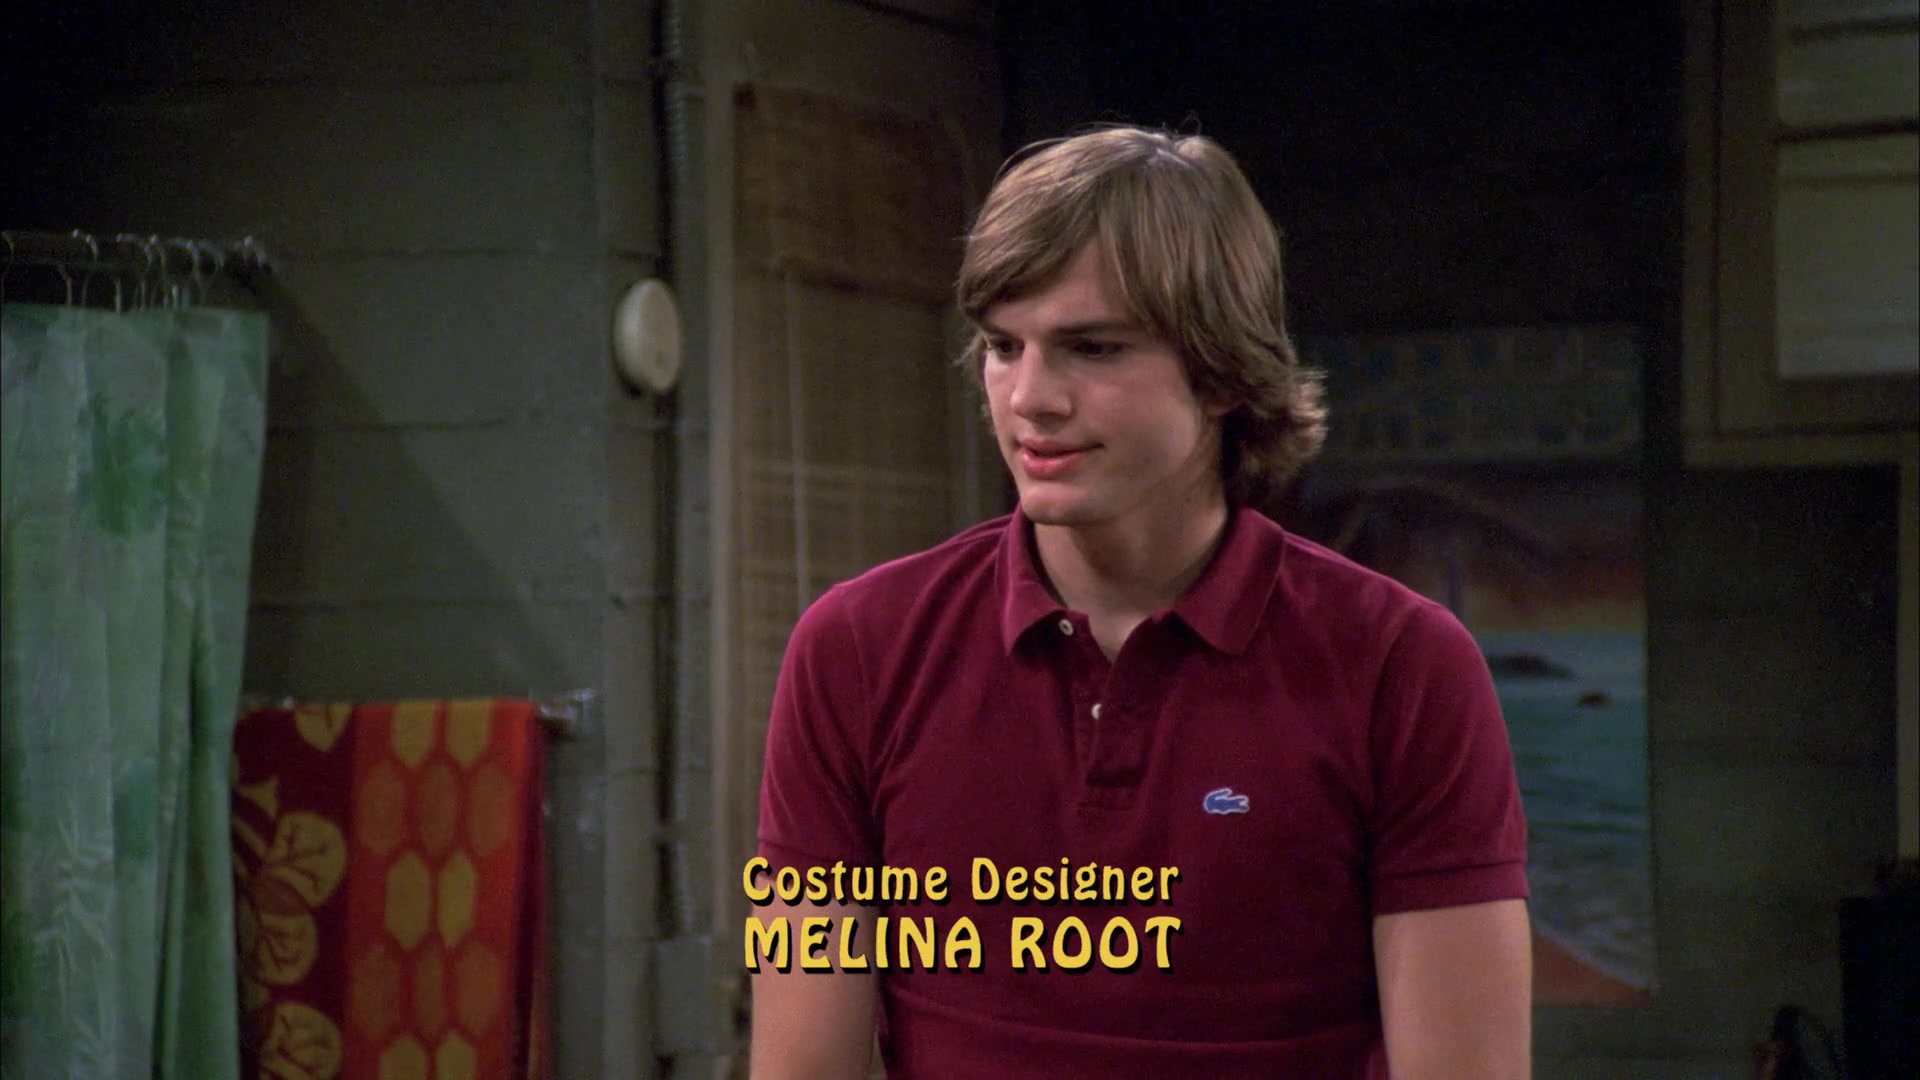 Lacoste Polo Shirt Worn By Ashton Kutcher As Michael Kelso In That 70s Show S05e01 Going To 6541